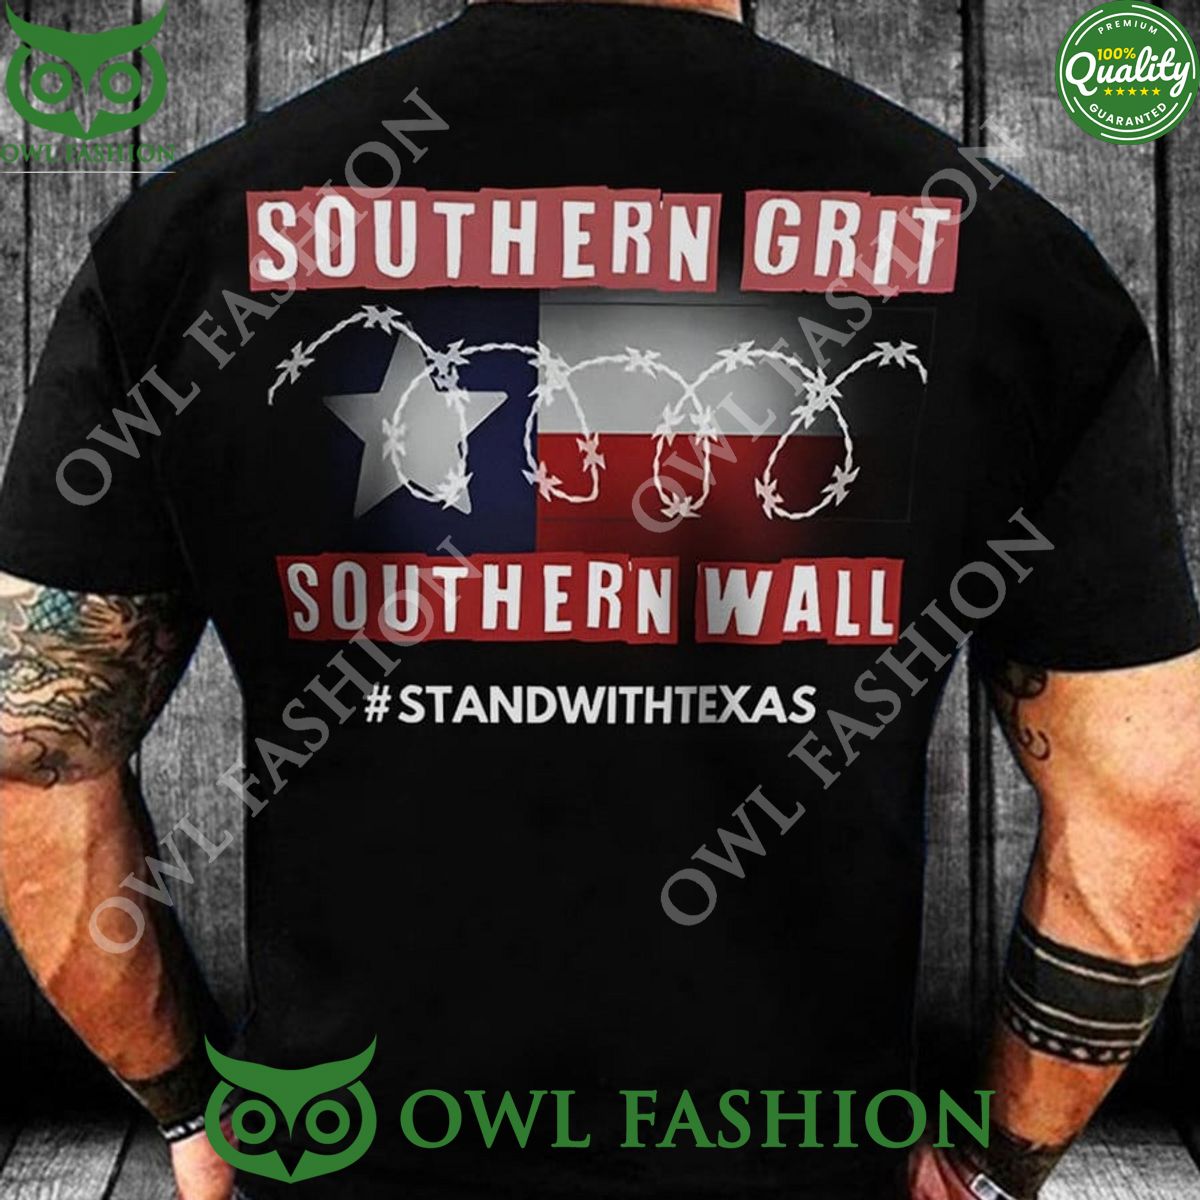 stand with texas southern grit southern wall t shirt 1 jyyWq.jpg